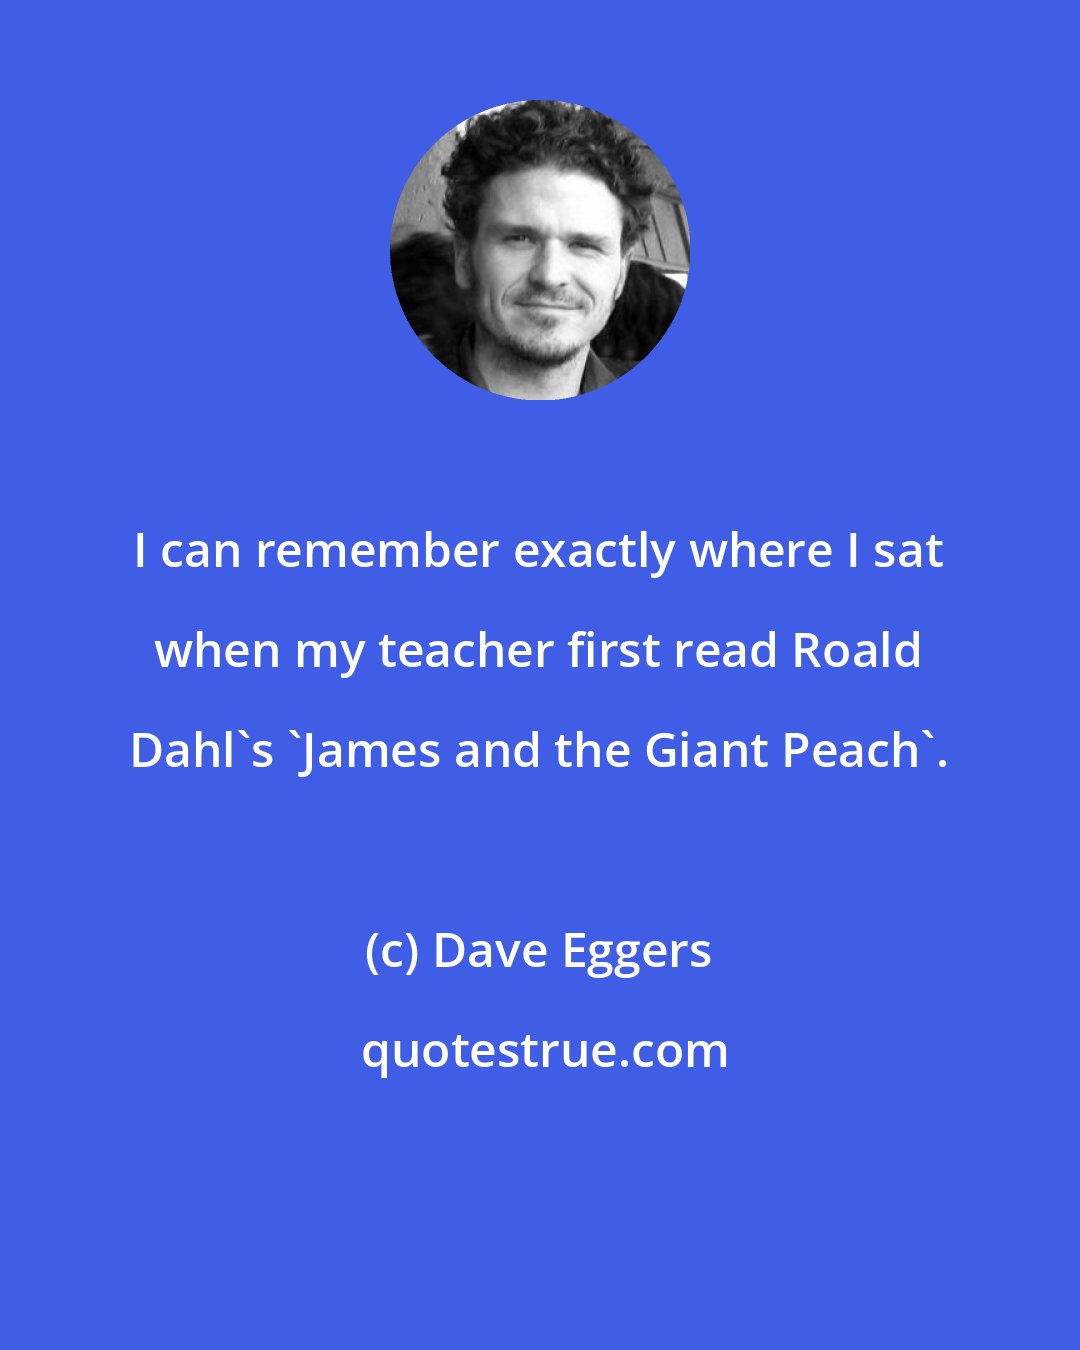 Dave Eggers: I can remember exactly where I sat when my teacher first read Roald Dahl's 'James and the Giant Peach'.